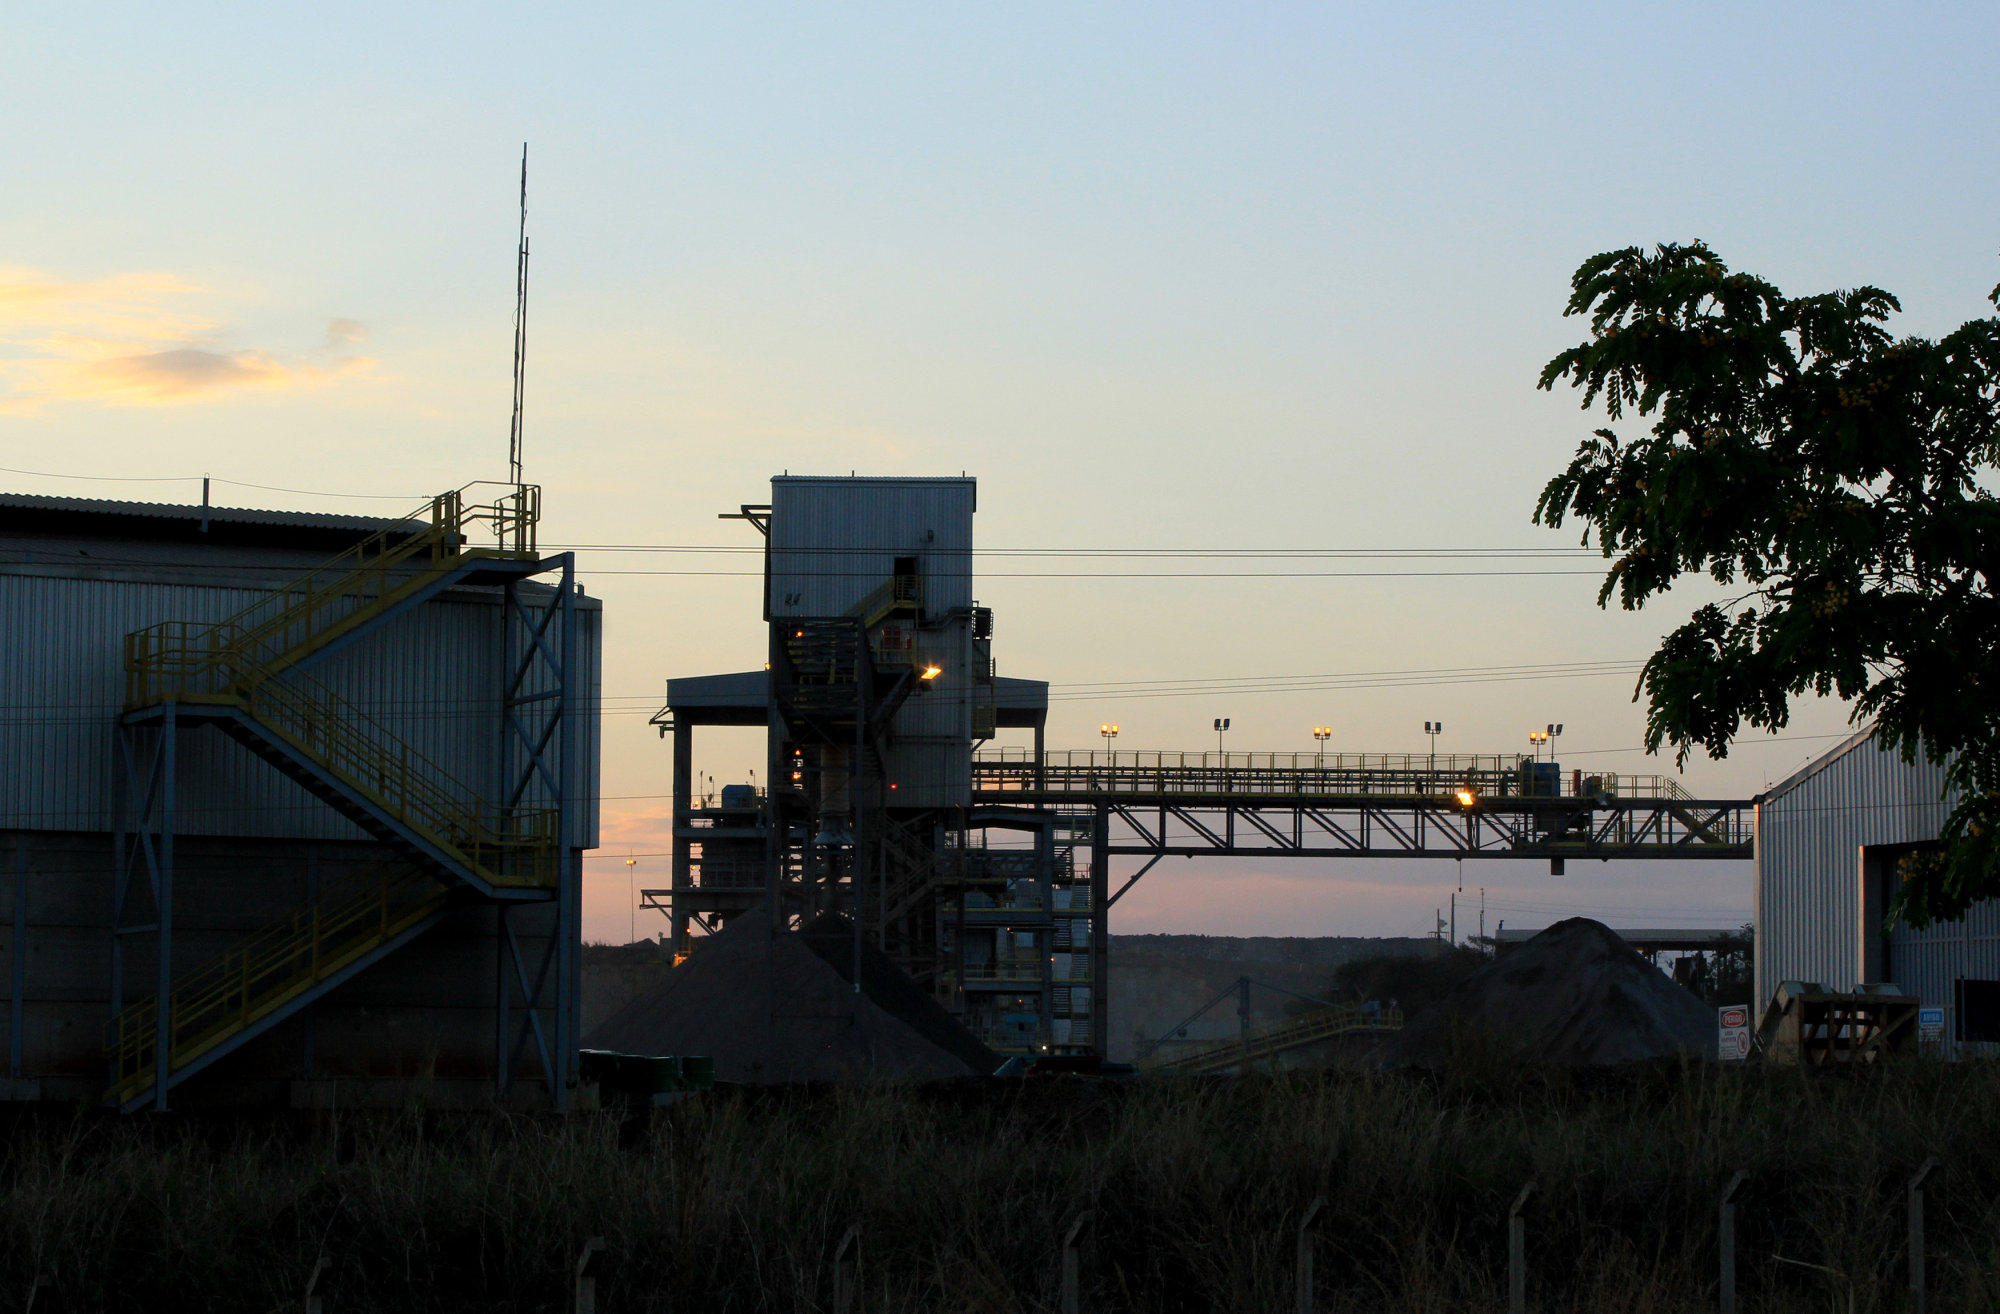 This niobium mining facility in Catalao, Brazil, was bought by China Molybdenum in 2016. Brazil controls about 85 percent of the world's supply of niobium, and presidential front-runner Jair Bolsonaro says Brazil should develop the resource itself. | REUTERS